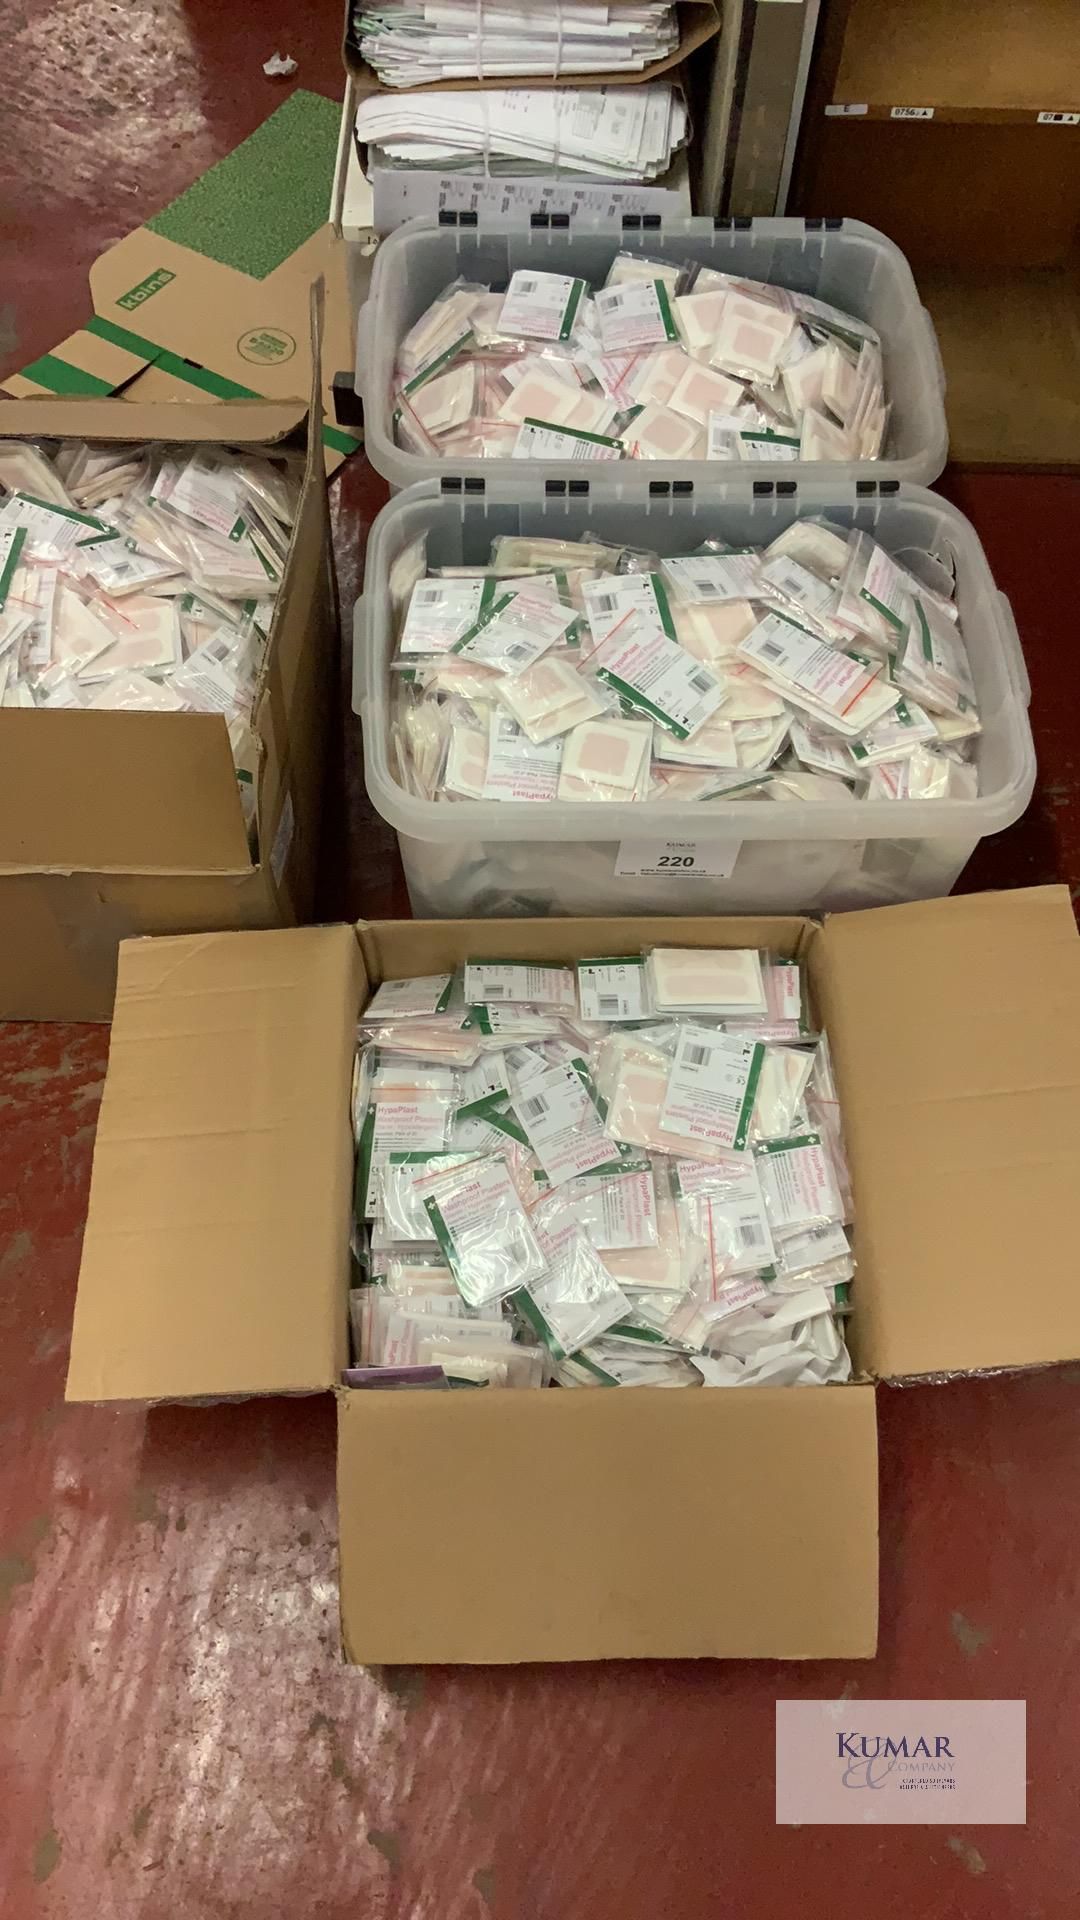 4: Large Boxes of 20 HypaPlast Sterile Washproof Assorted Plasters (10/2025) - Thousands of - Image 3 of 7